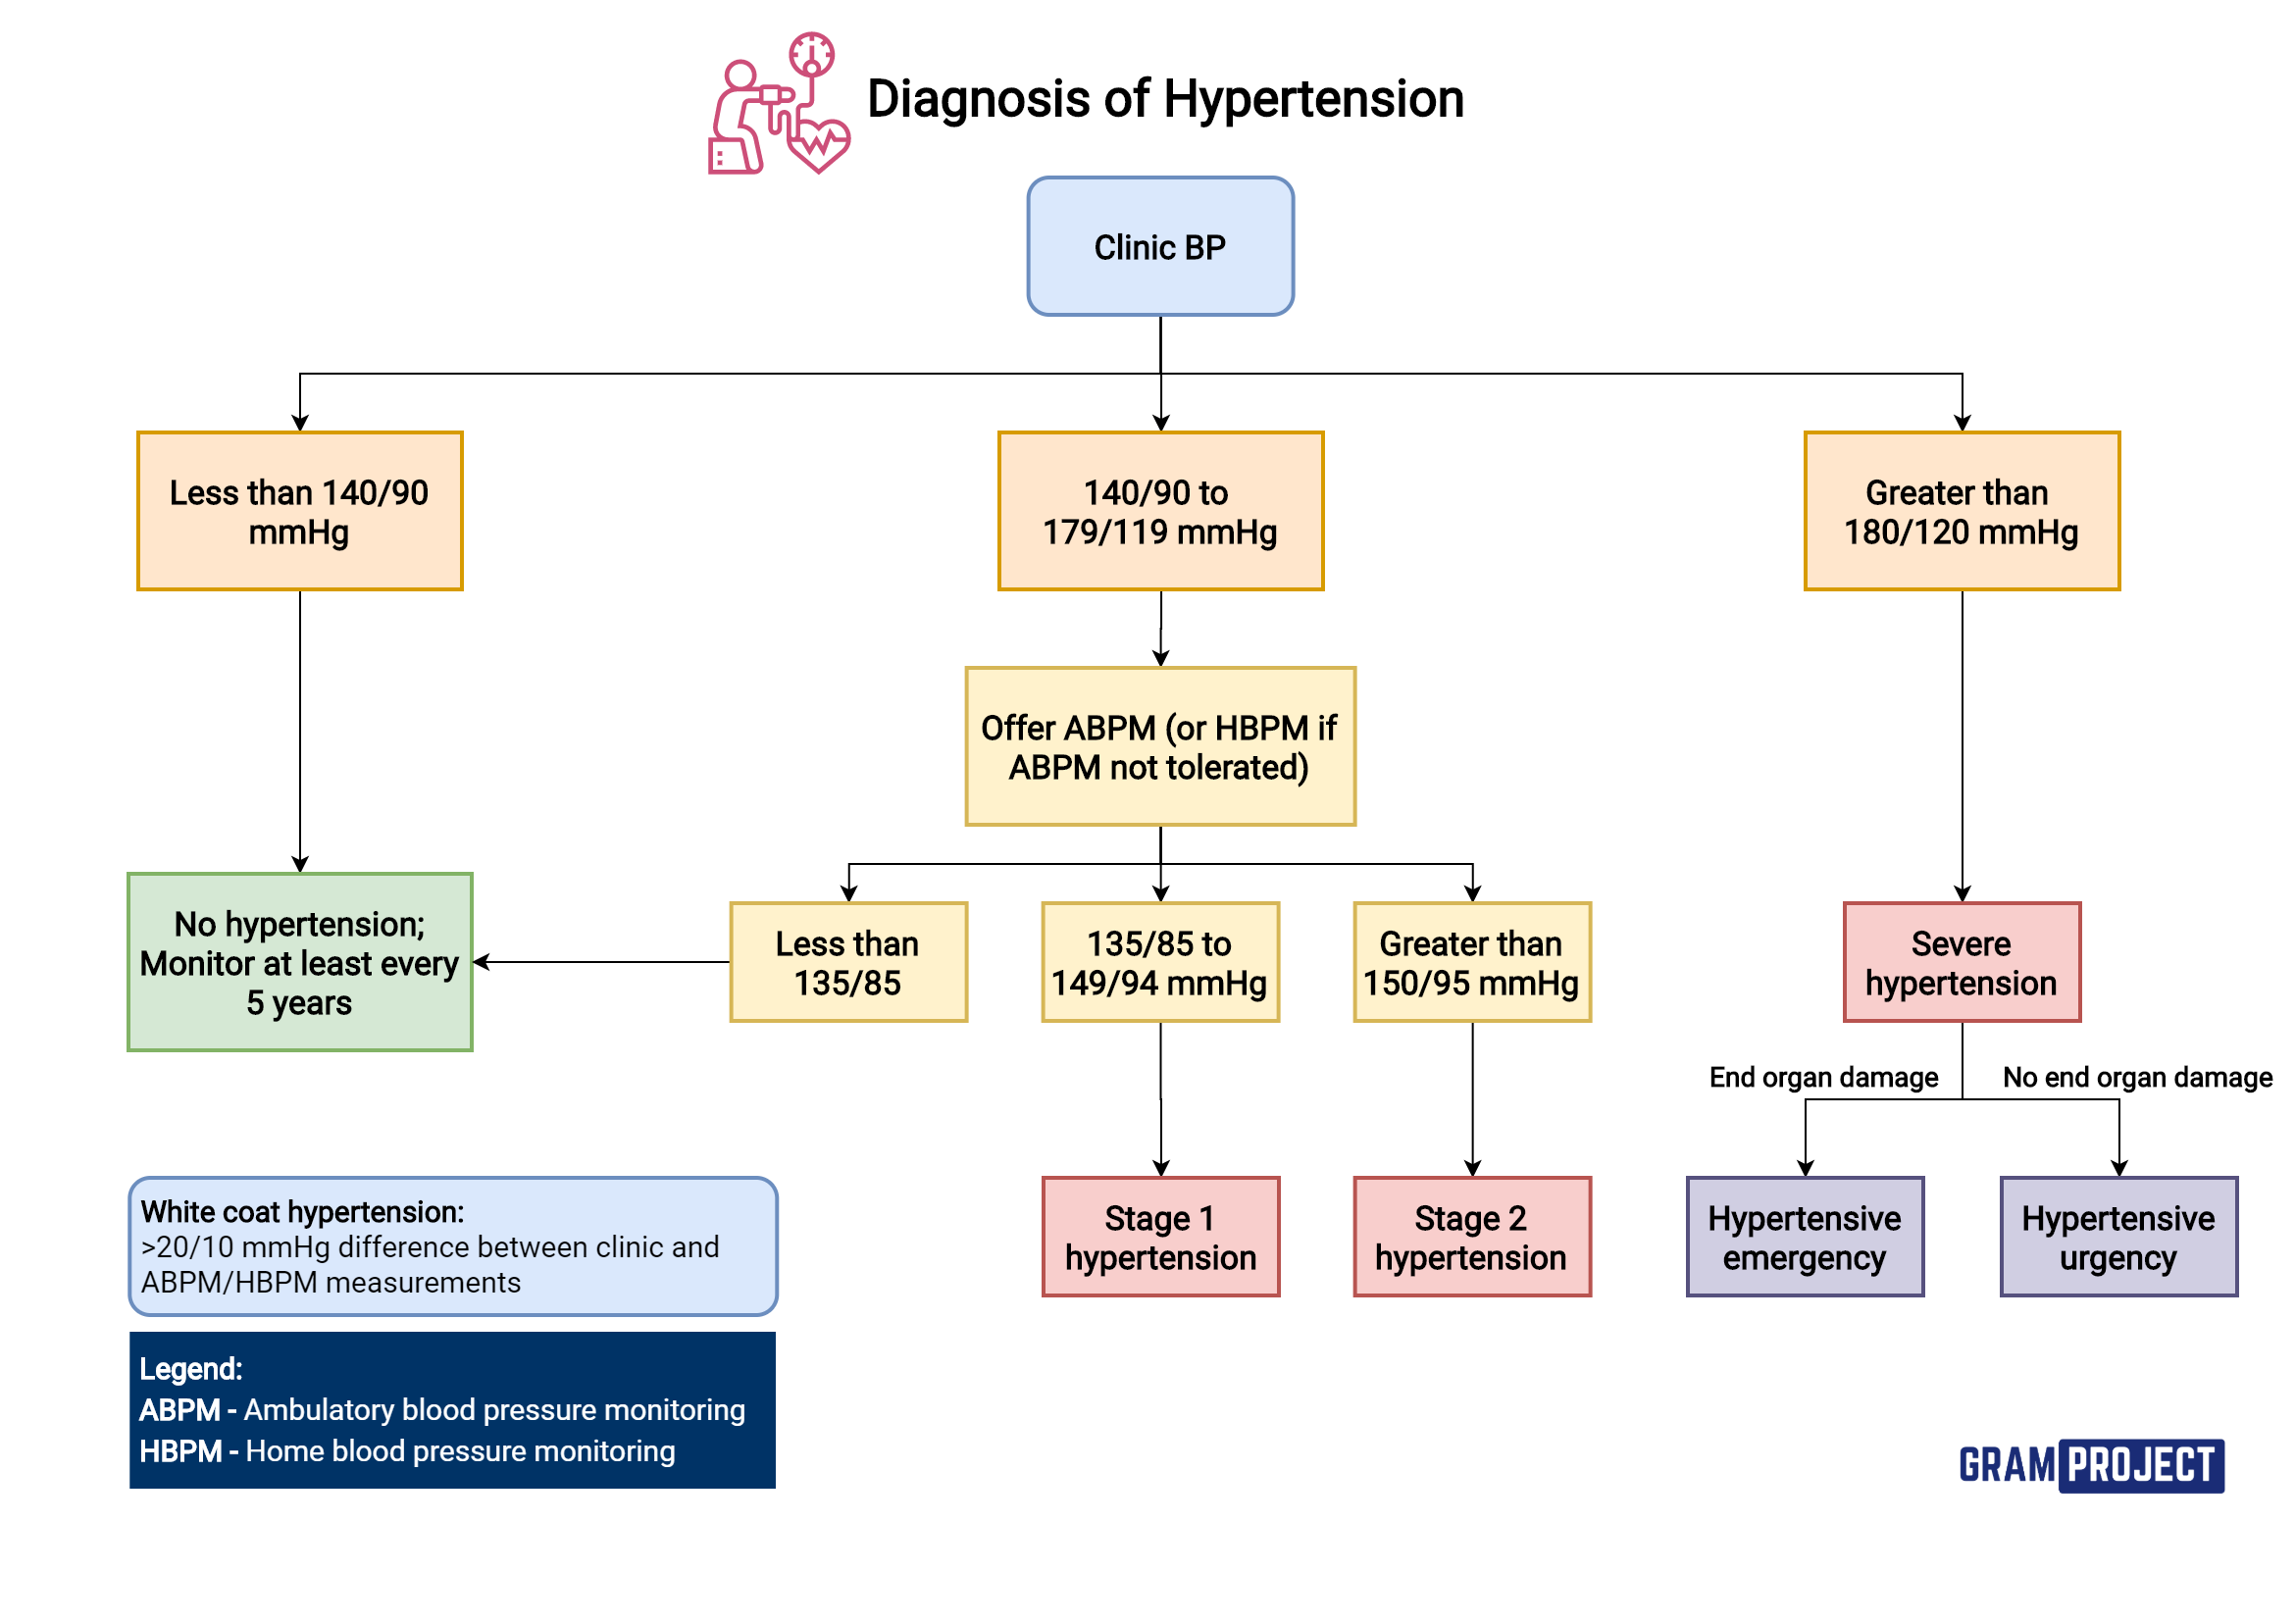 Diagnosis of hypertension flowchart based on NICE guidelines